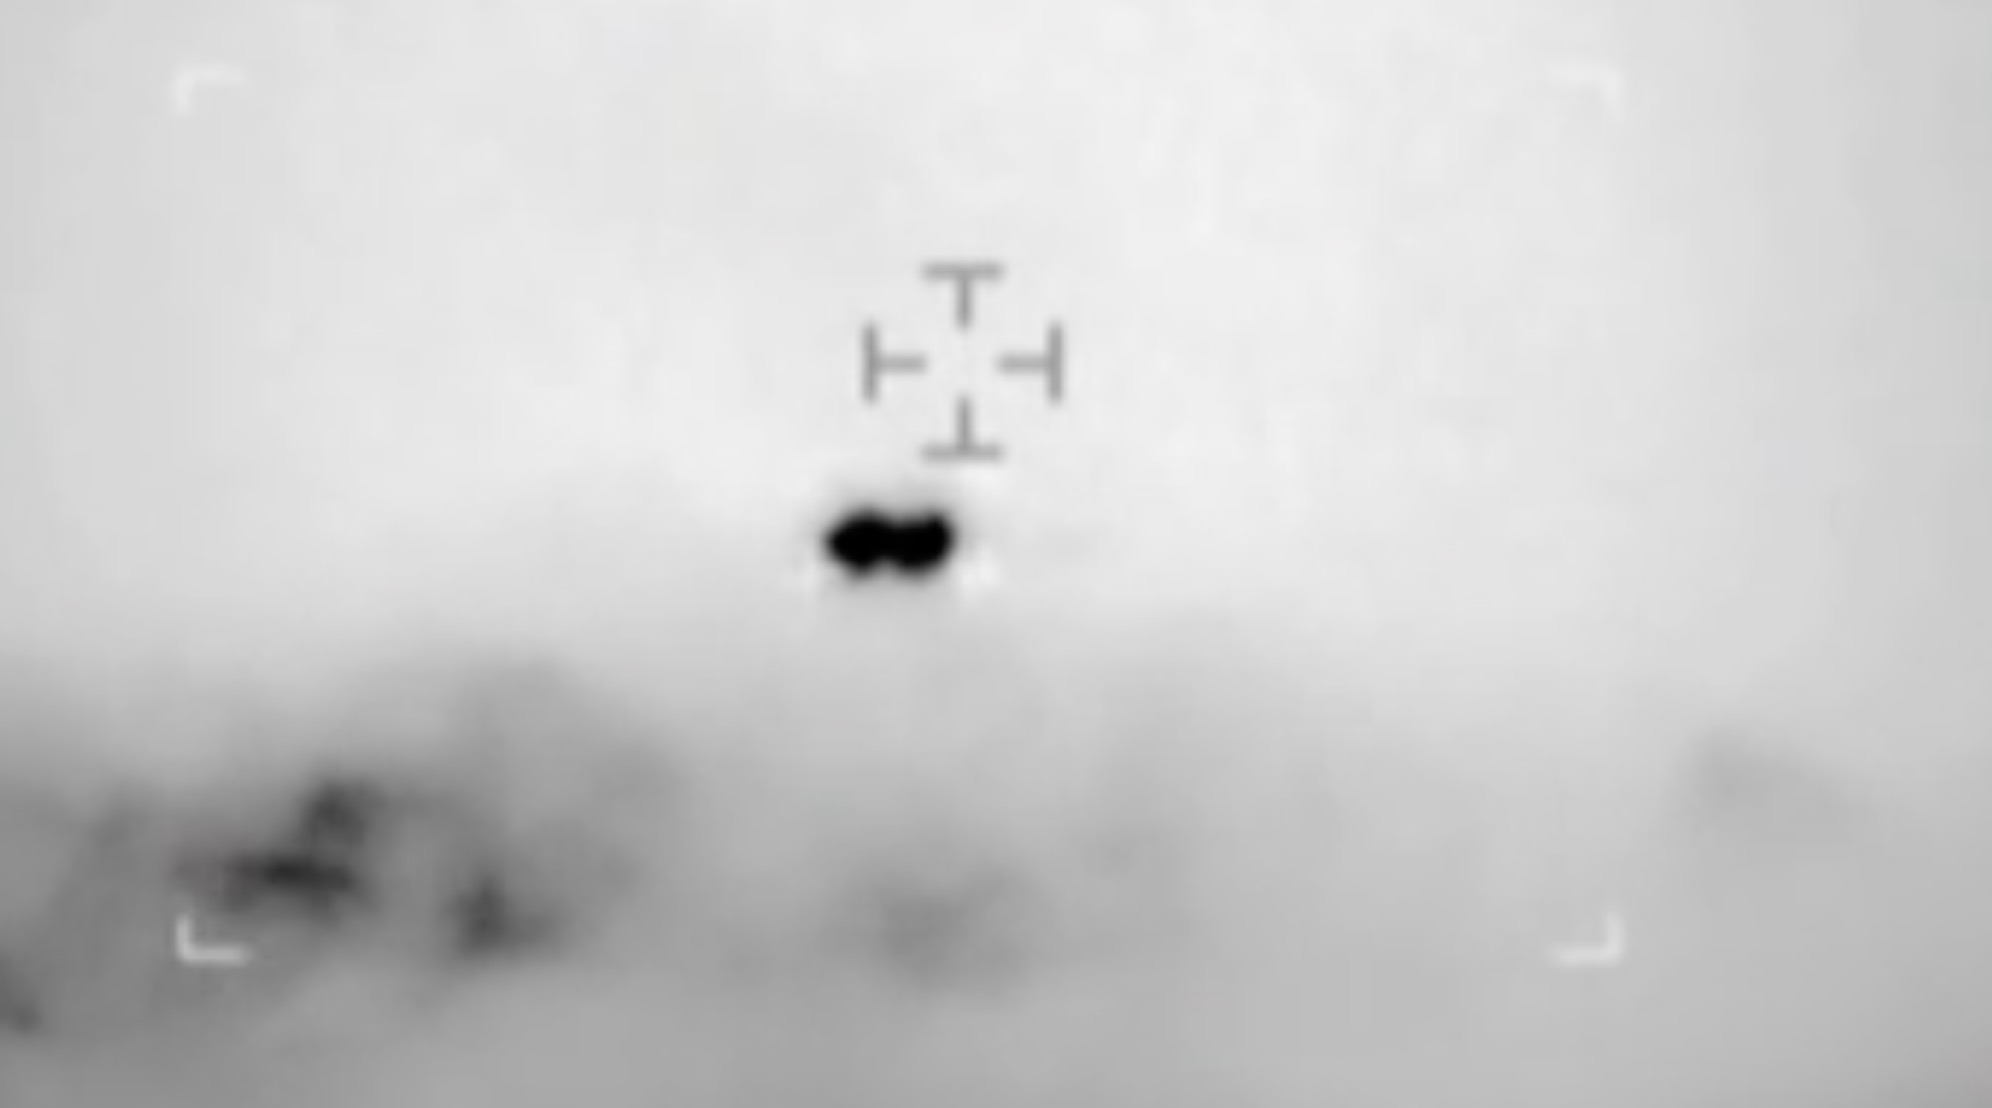 Chilean government releases video of disturbing UFO sighting